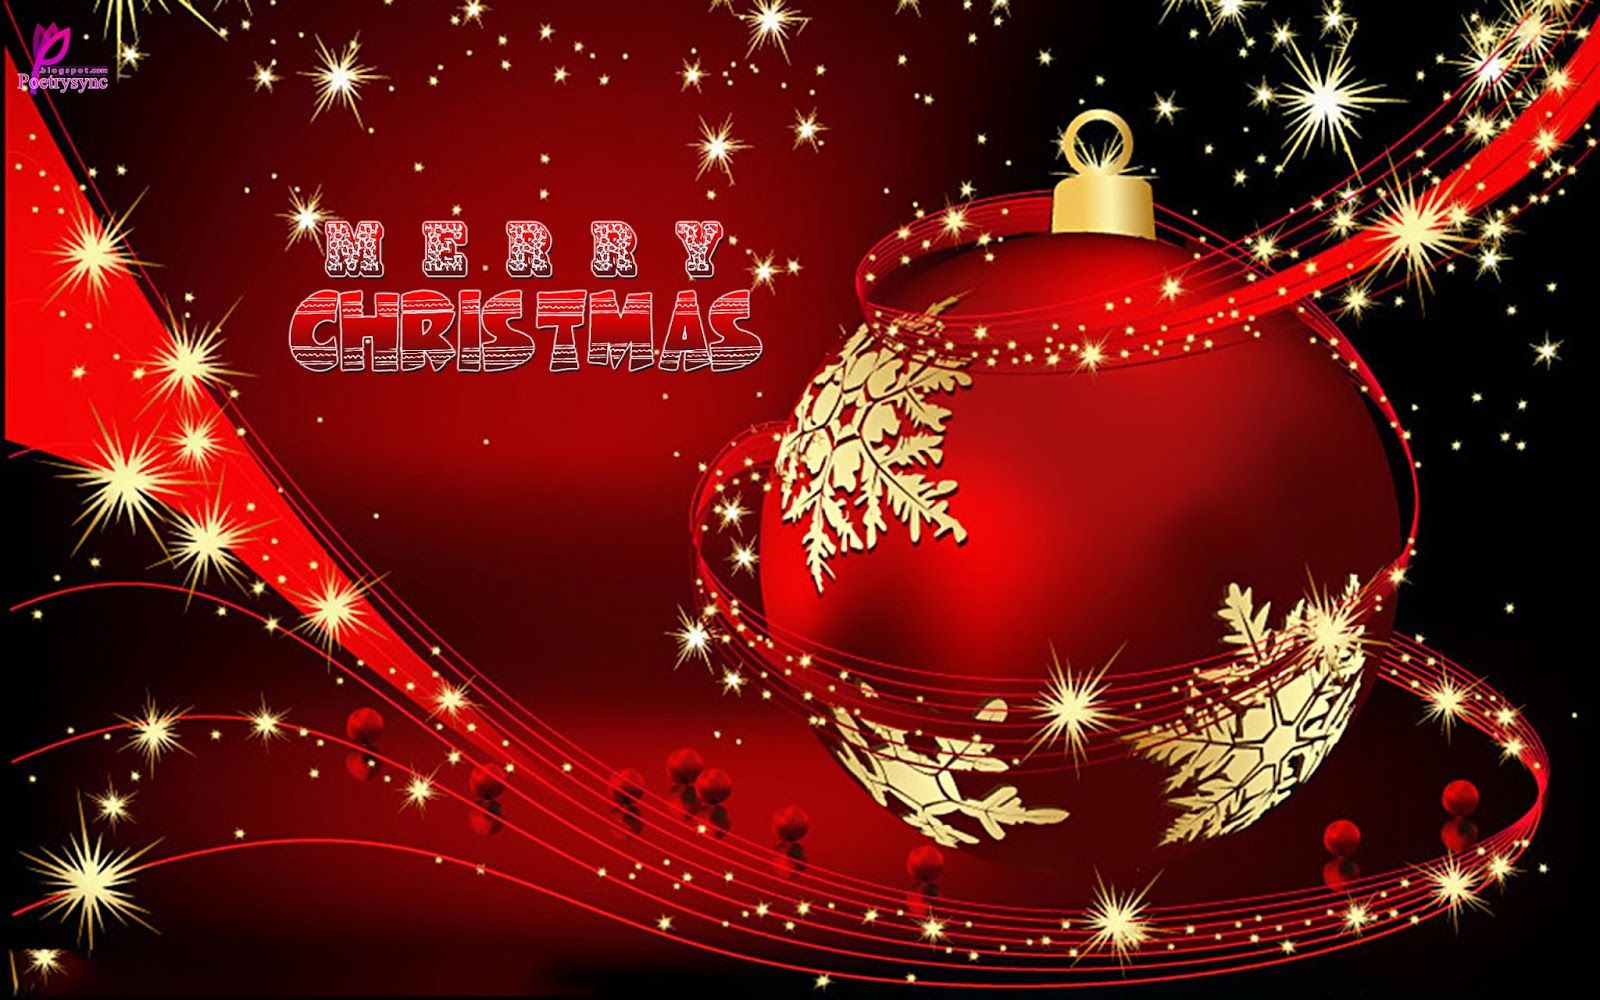 Merry Chrismast and Happy New Year: Christmas HD Wallpapers Collection